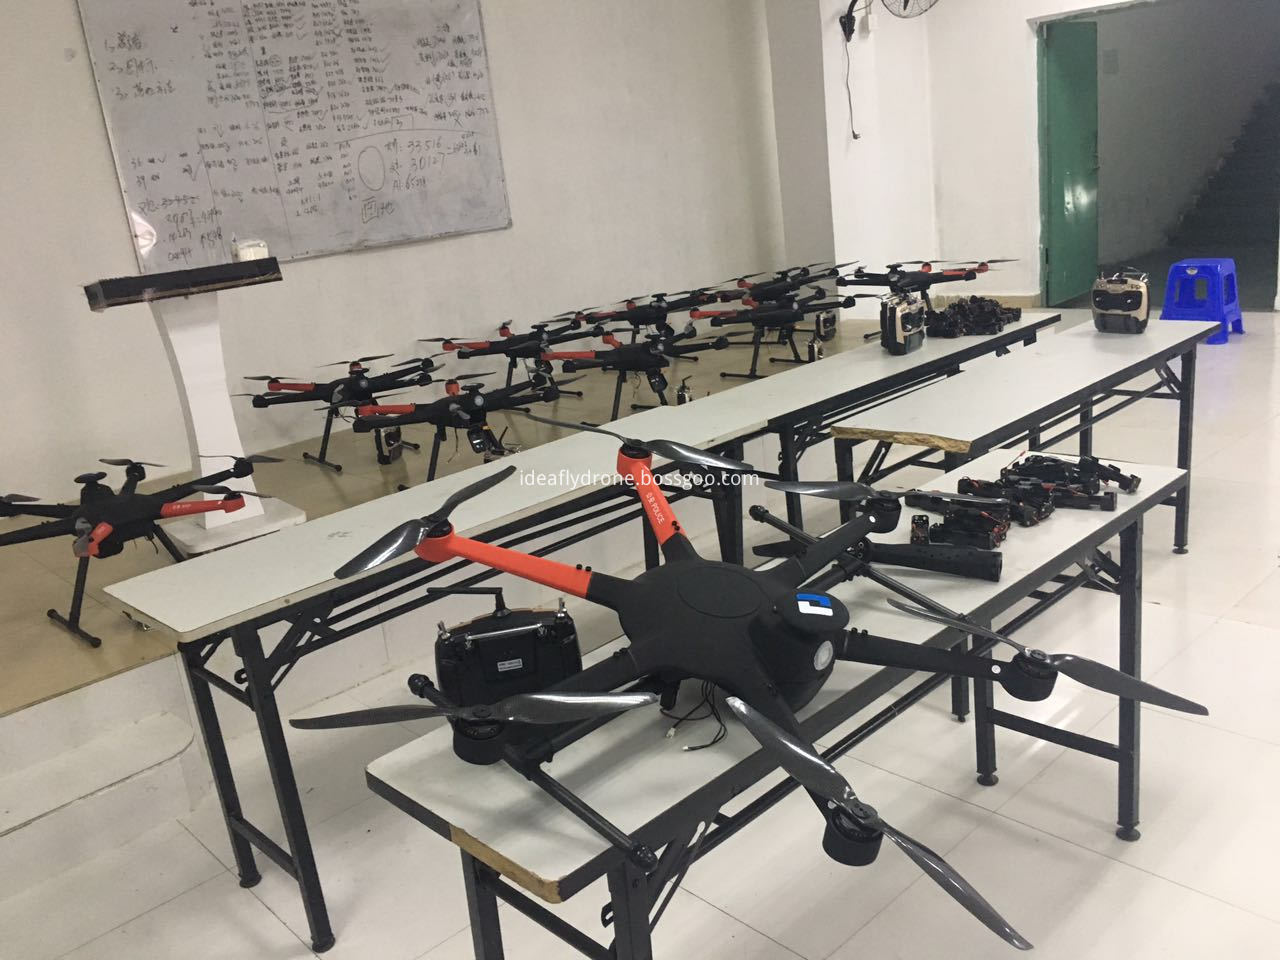 Commercial Drone frame